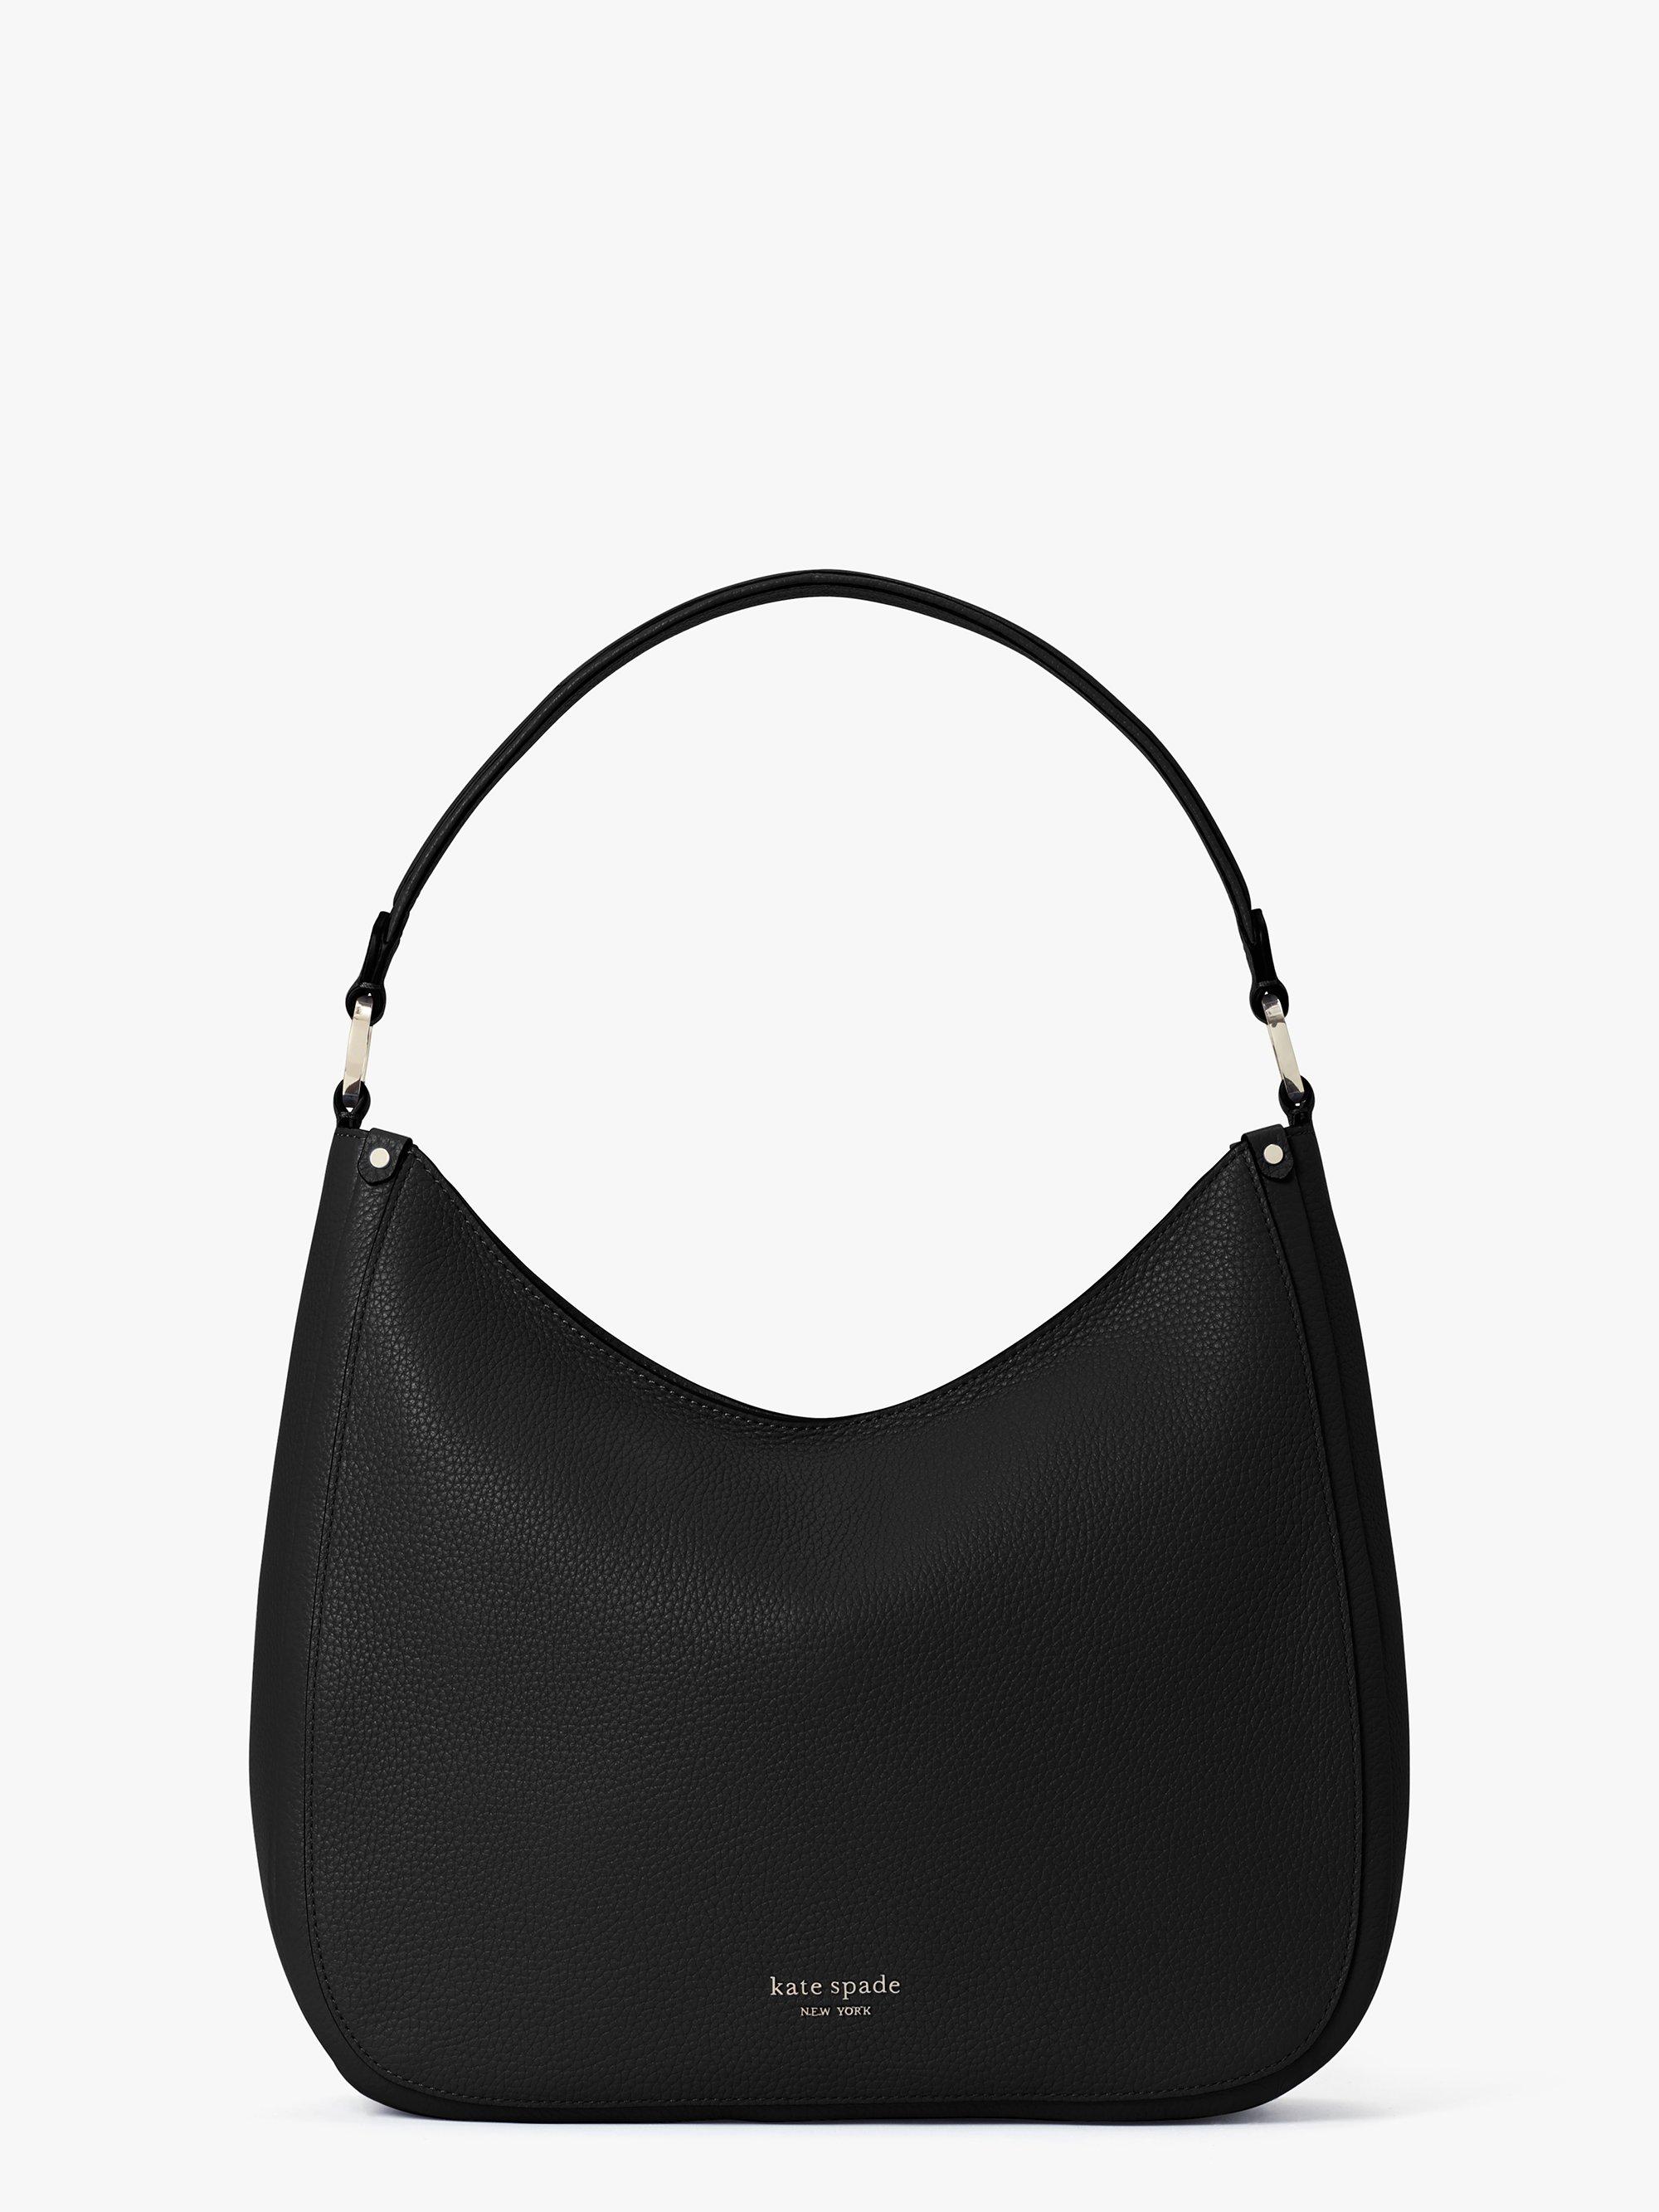 Kate Spade Leather Roulette Large Hobo Bag in Black - Lyst